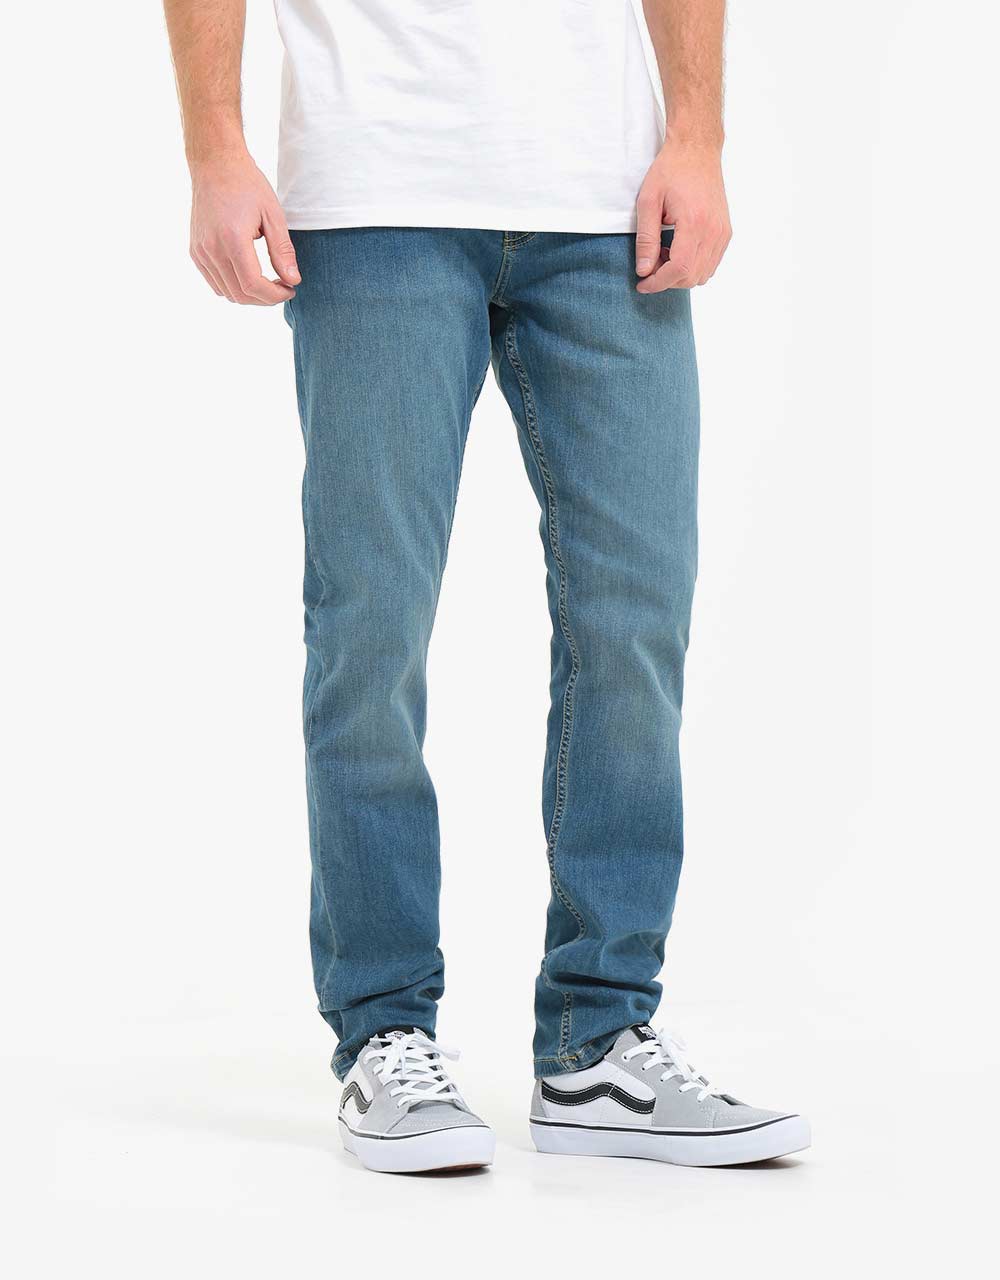 Route One Slim Denim Jeans - Washed Blue